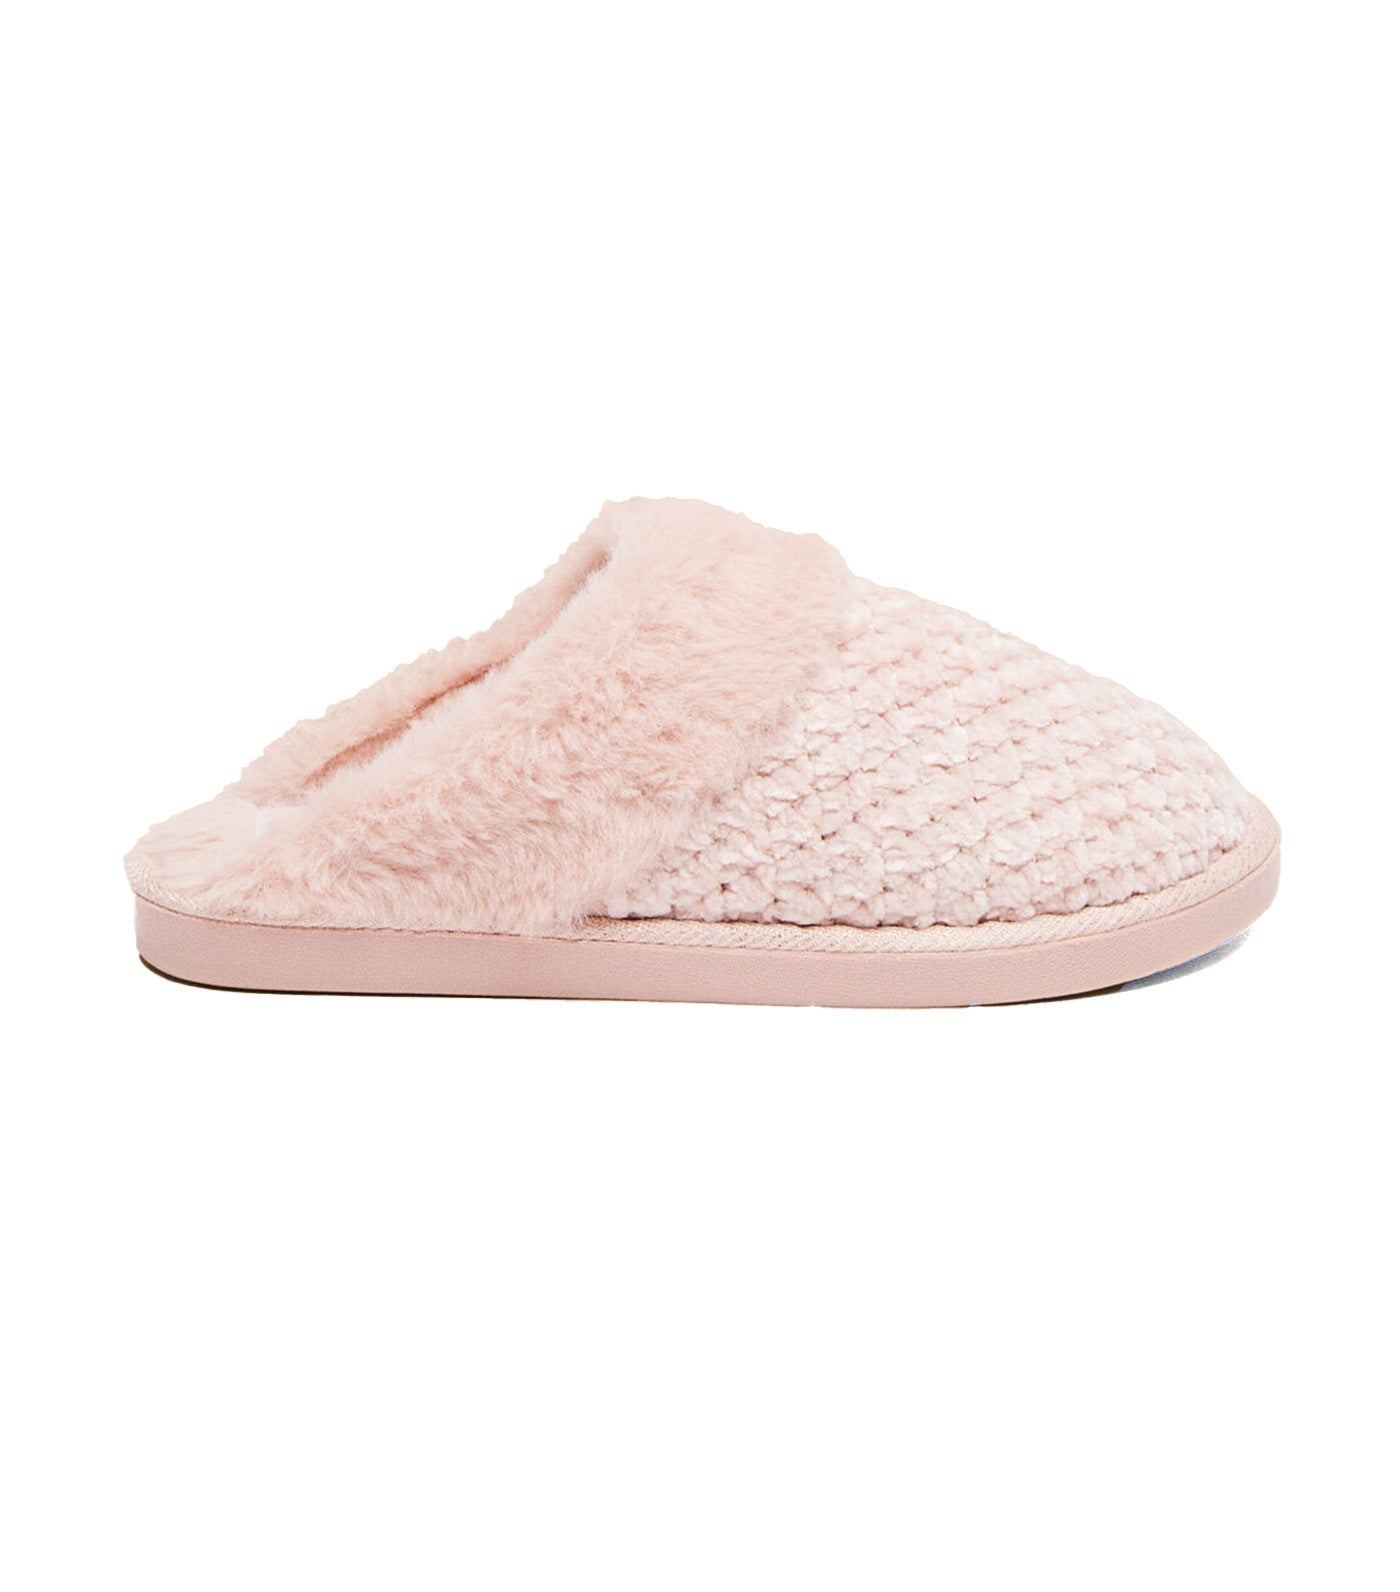 Furry Slippers Pink